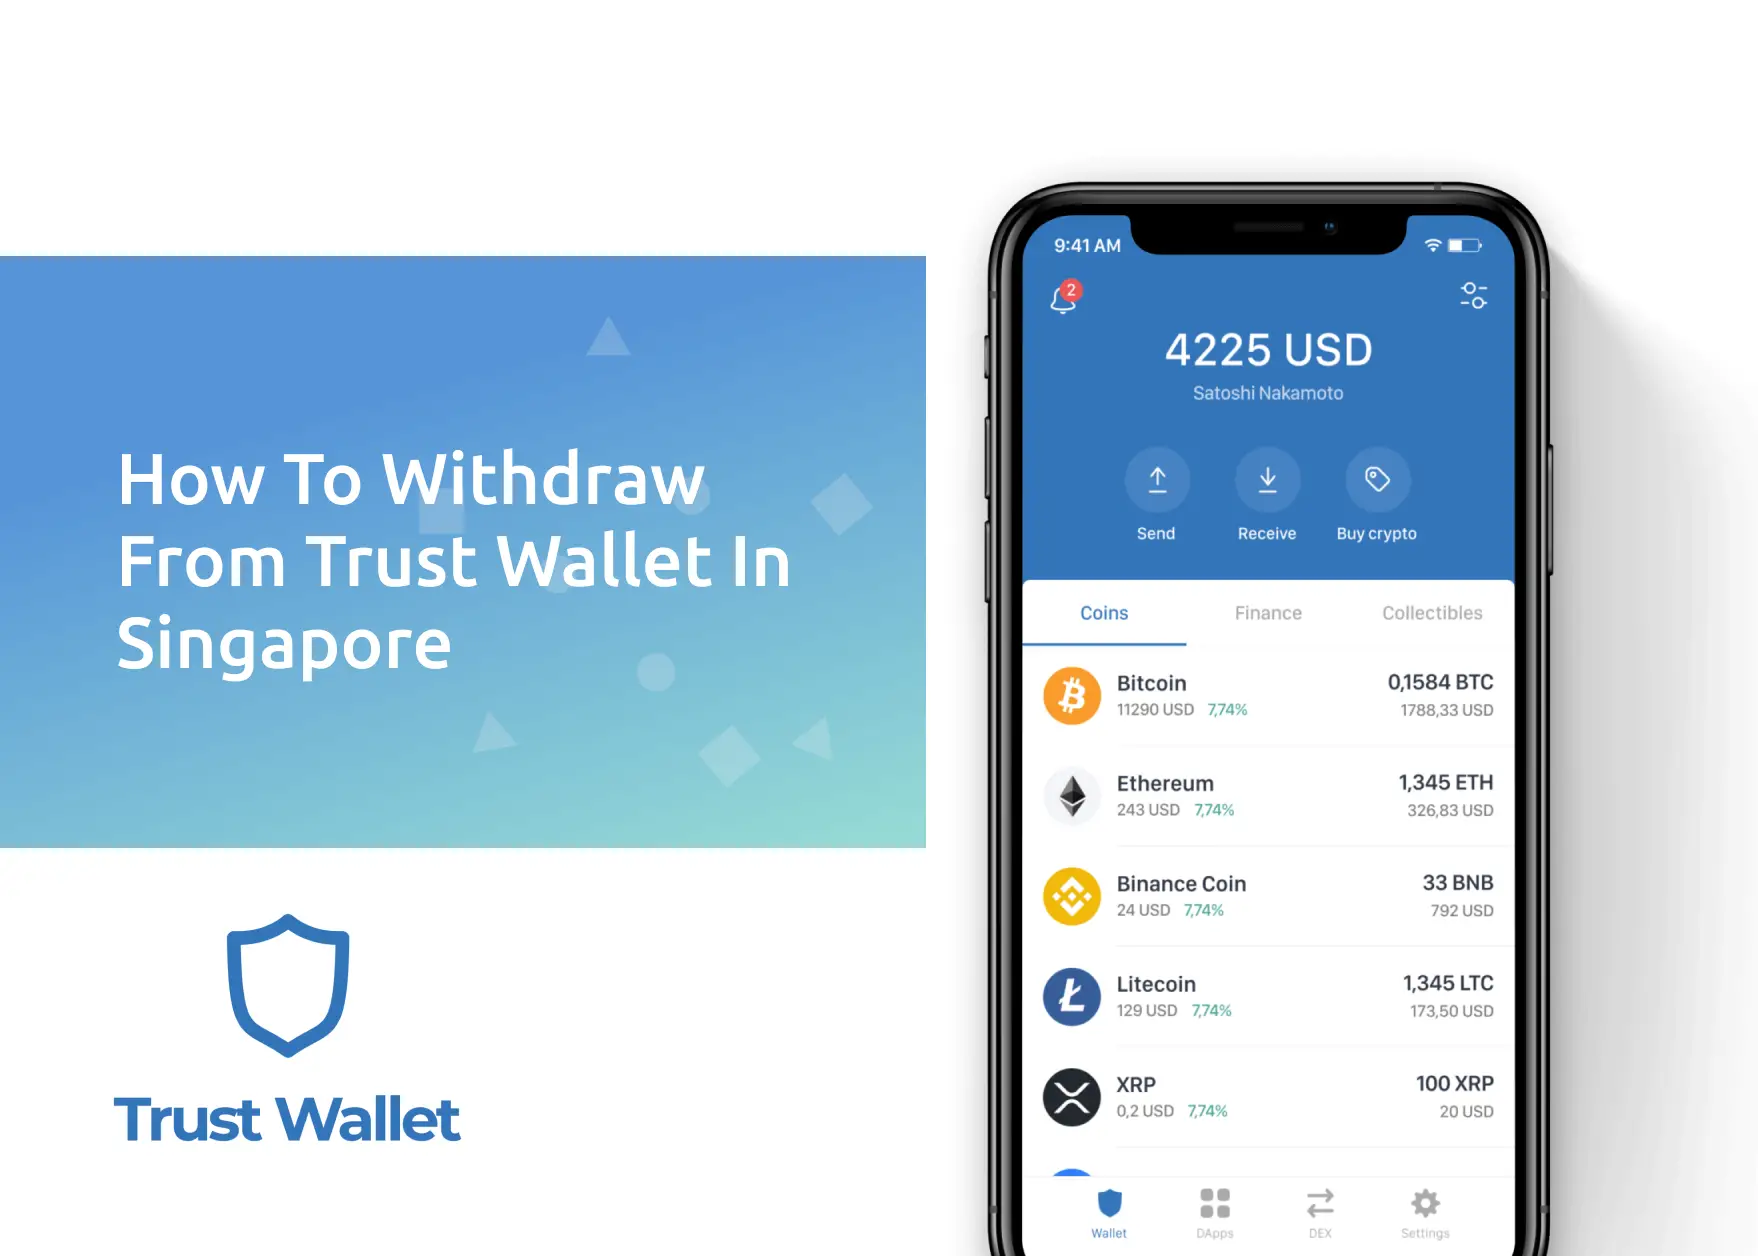 How To Withdraw From Trust Wallet In Singapore